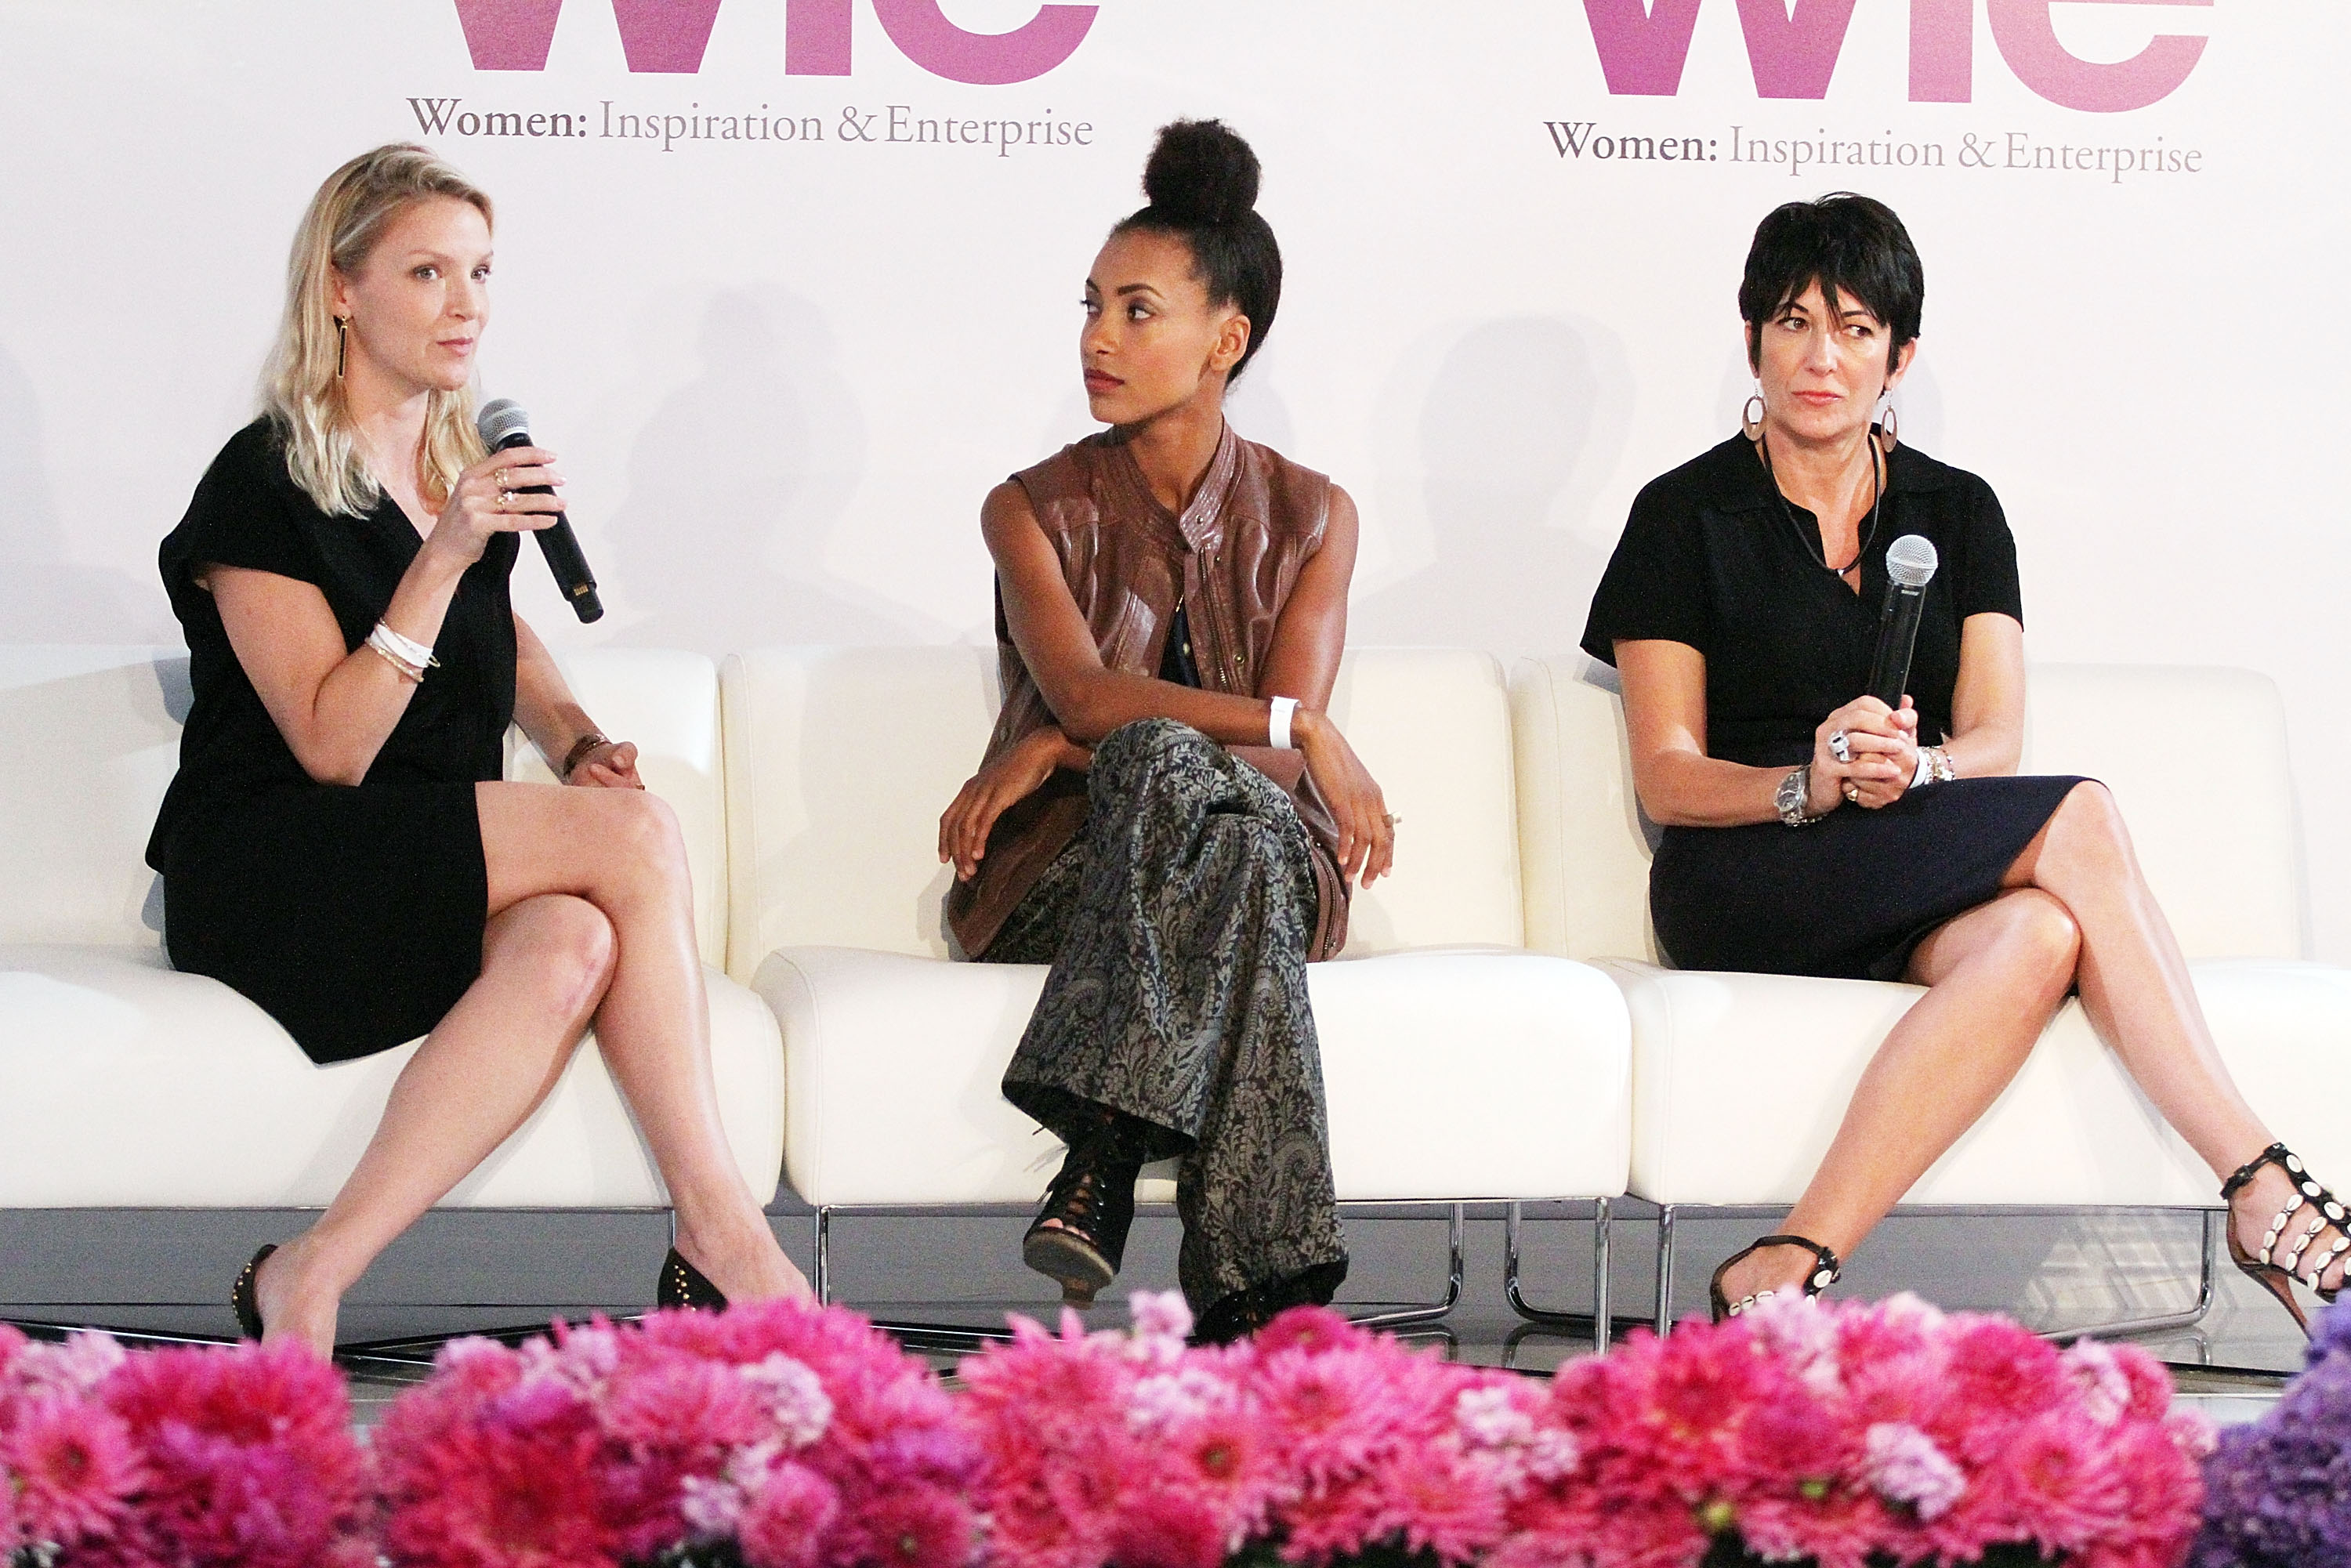 Kristy Caylor, Esperanza Spalding and Ghislaine Maxwell attend day 1 of the 4th Annual WIE Symposium at Center 548 on September 20, 2013 in New York City. (Photo by Laura Cavanaugh/Getty Images)